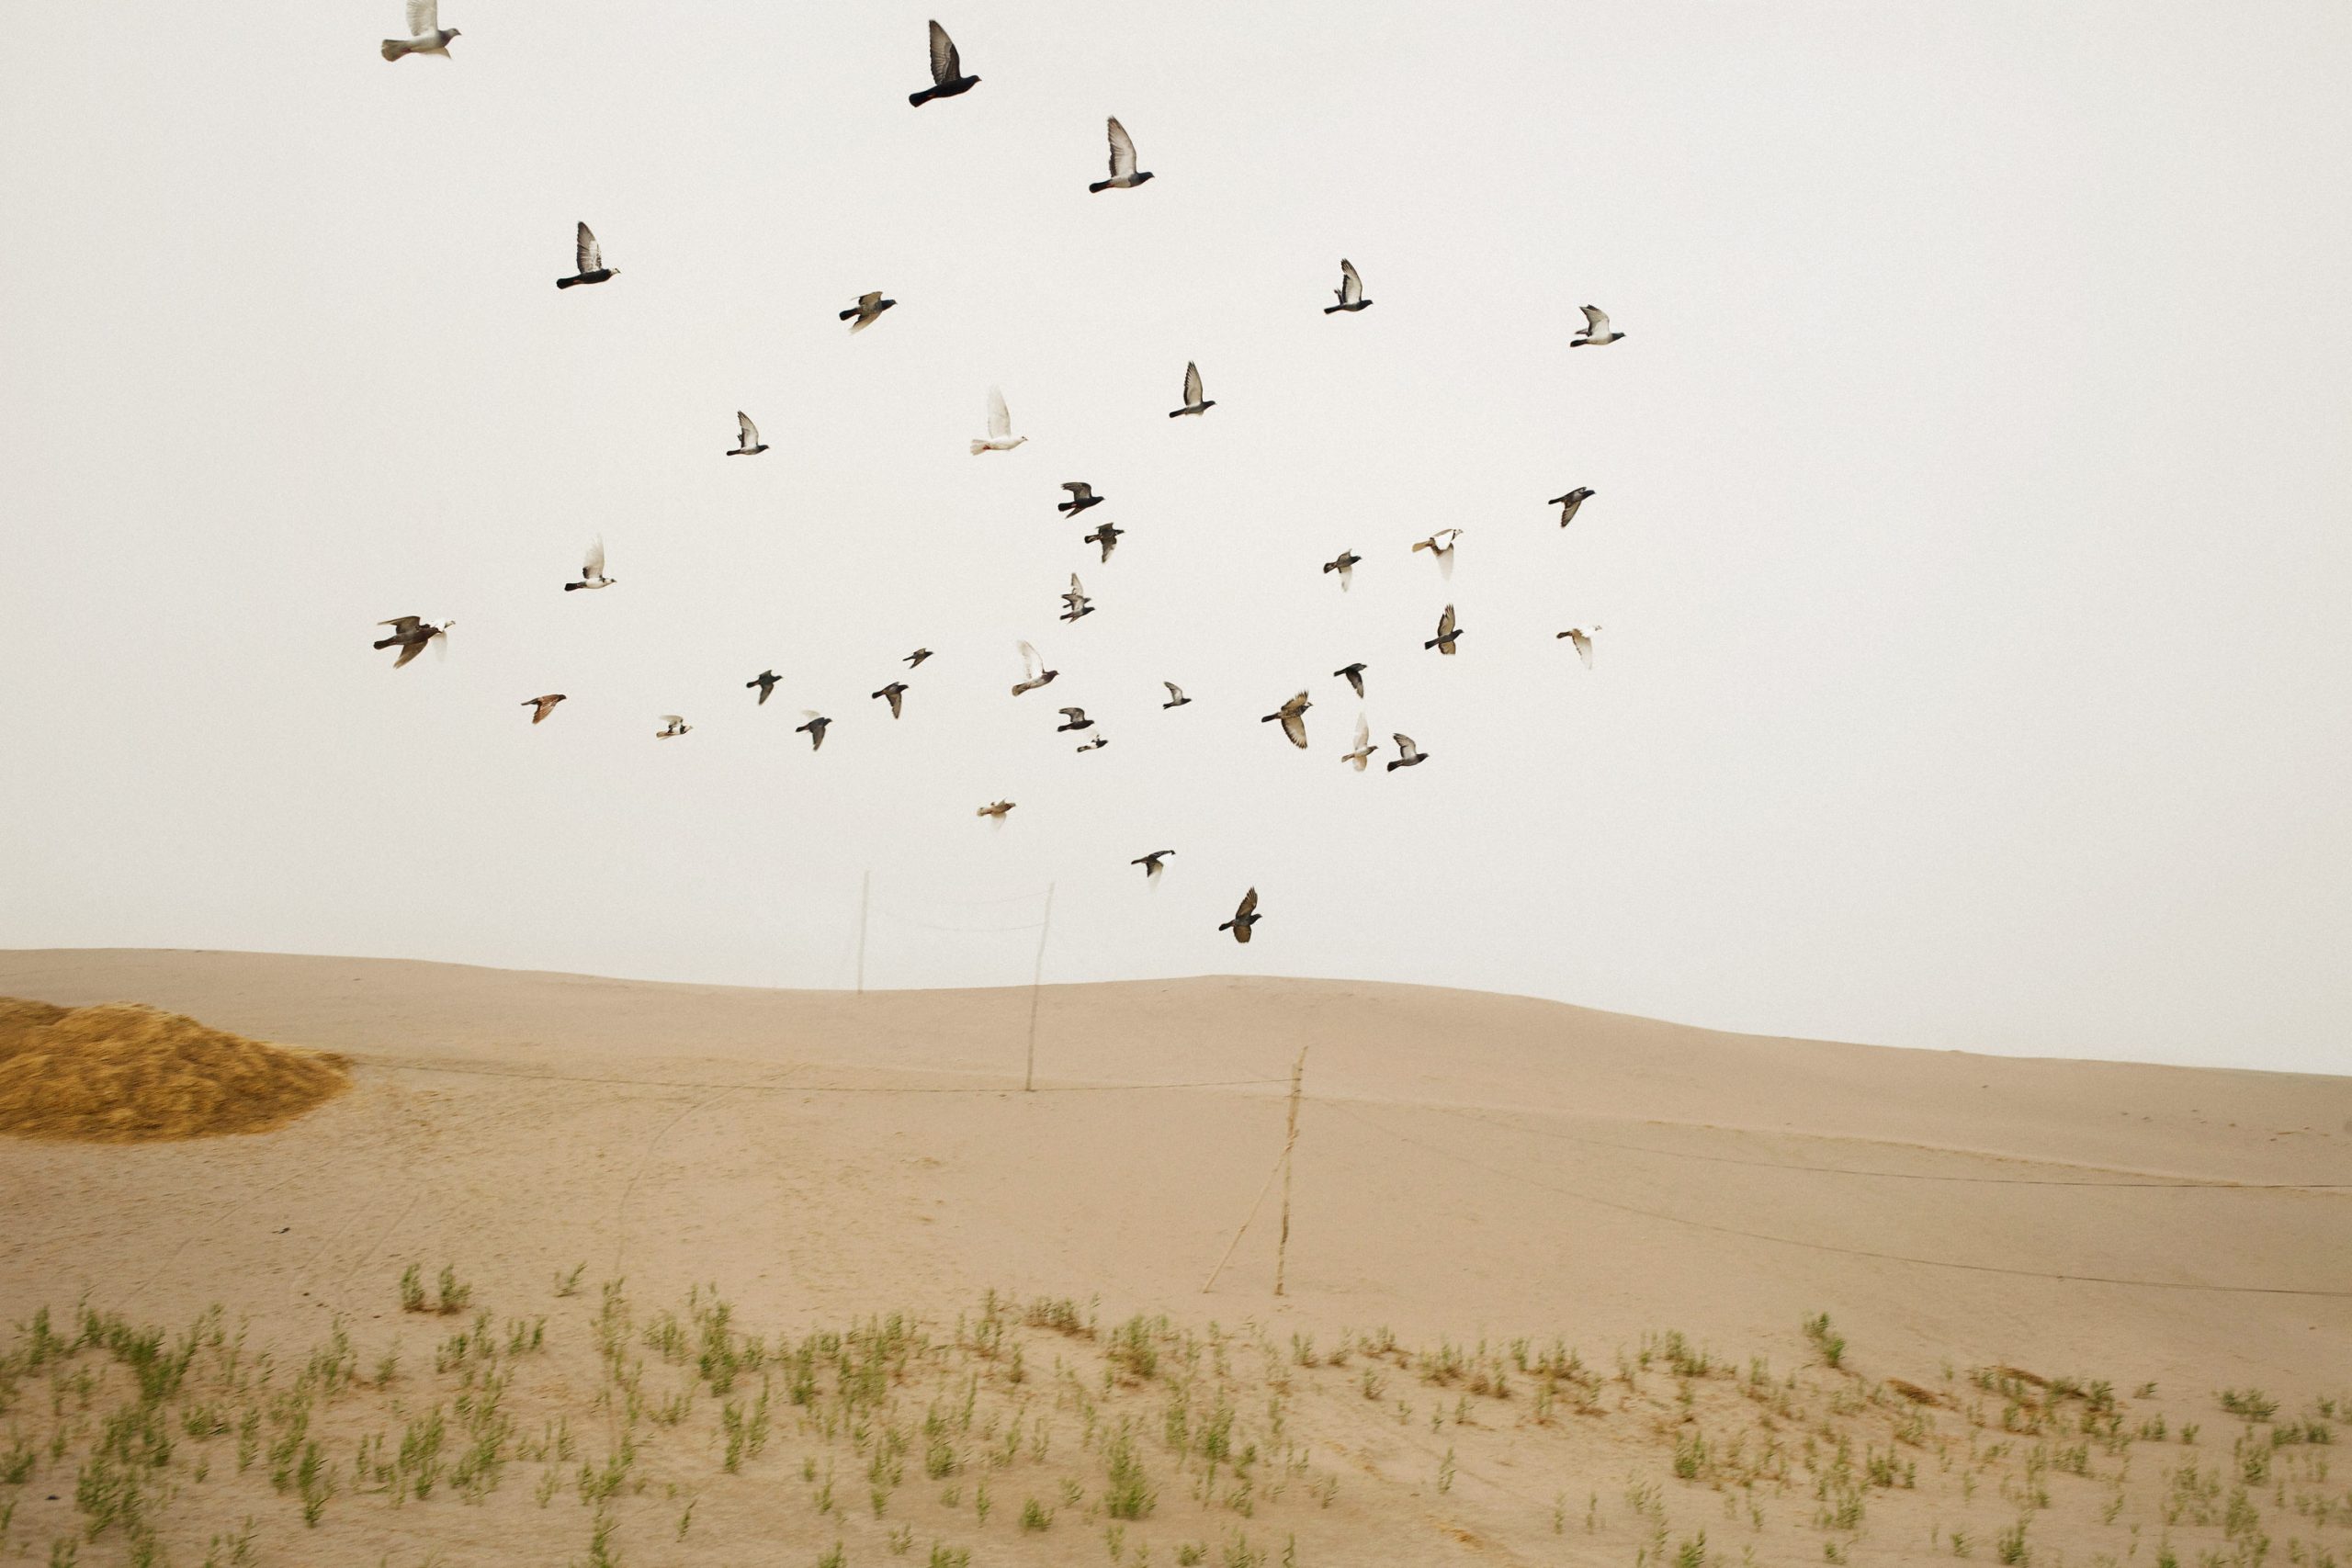 A flock of pigeons circle in the air above homes in a Uyghur farming village on the desert's edge.